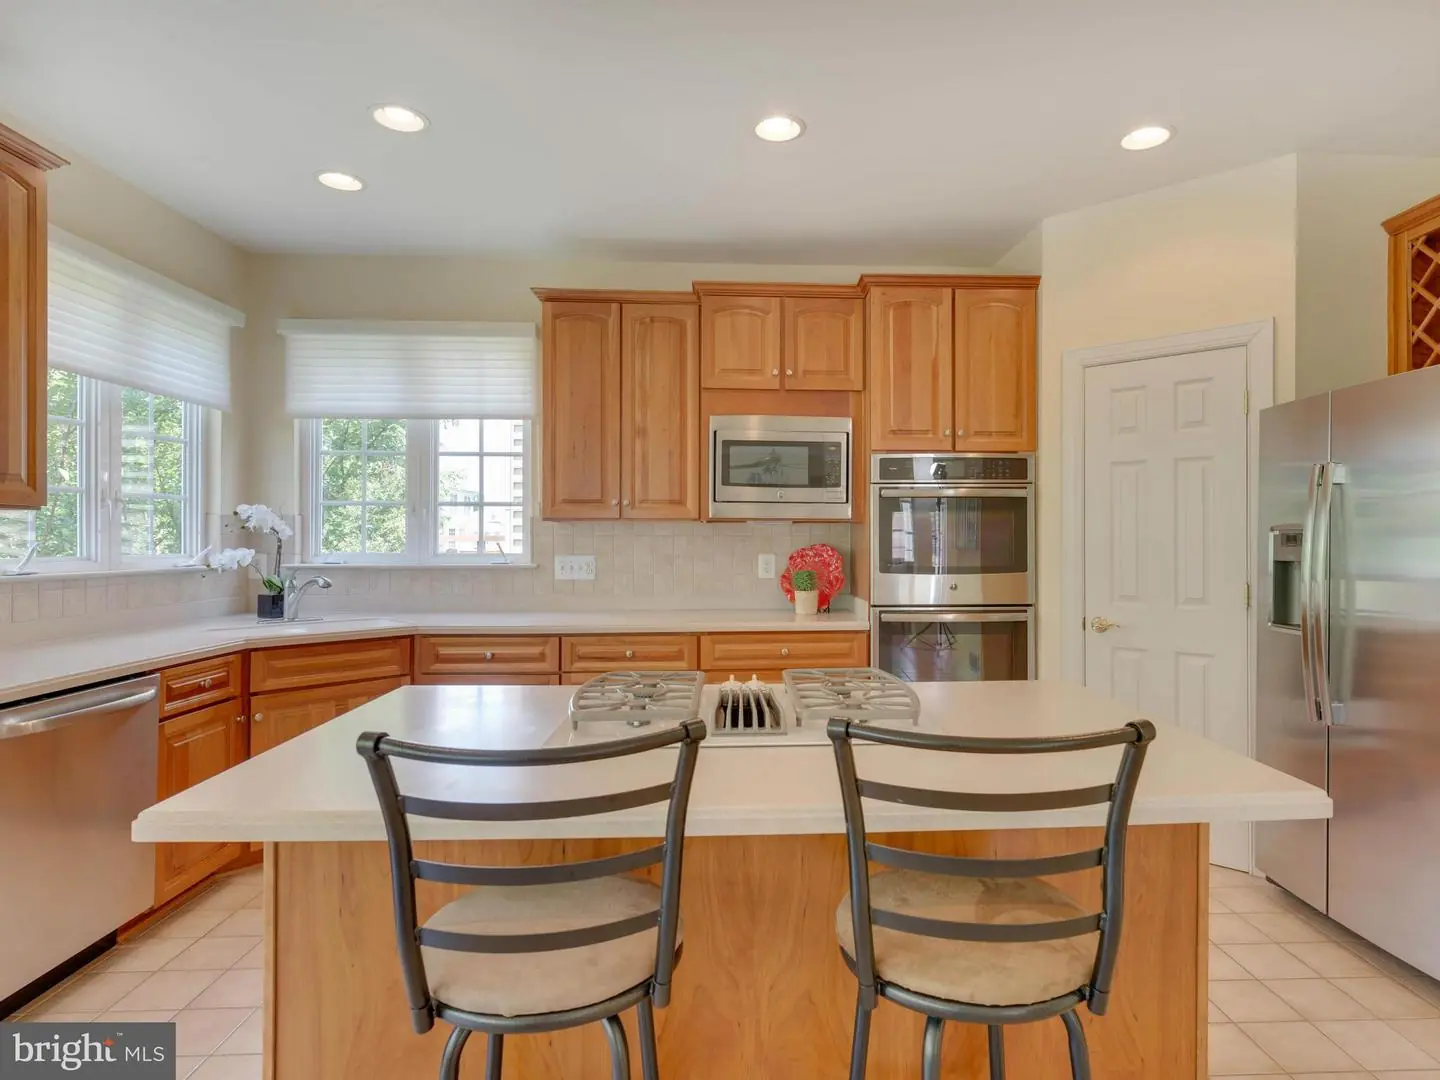 1001946313-300661330563-2021-09-06-14-19-43  |  Governors Hll | Alexandria Delaware Real Estate For Sale | MLS# 1001946313  - Best of Northern Virginia